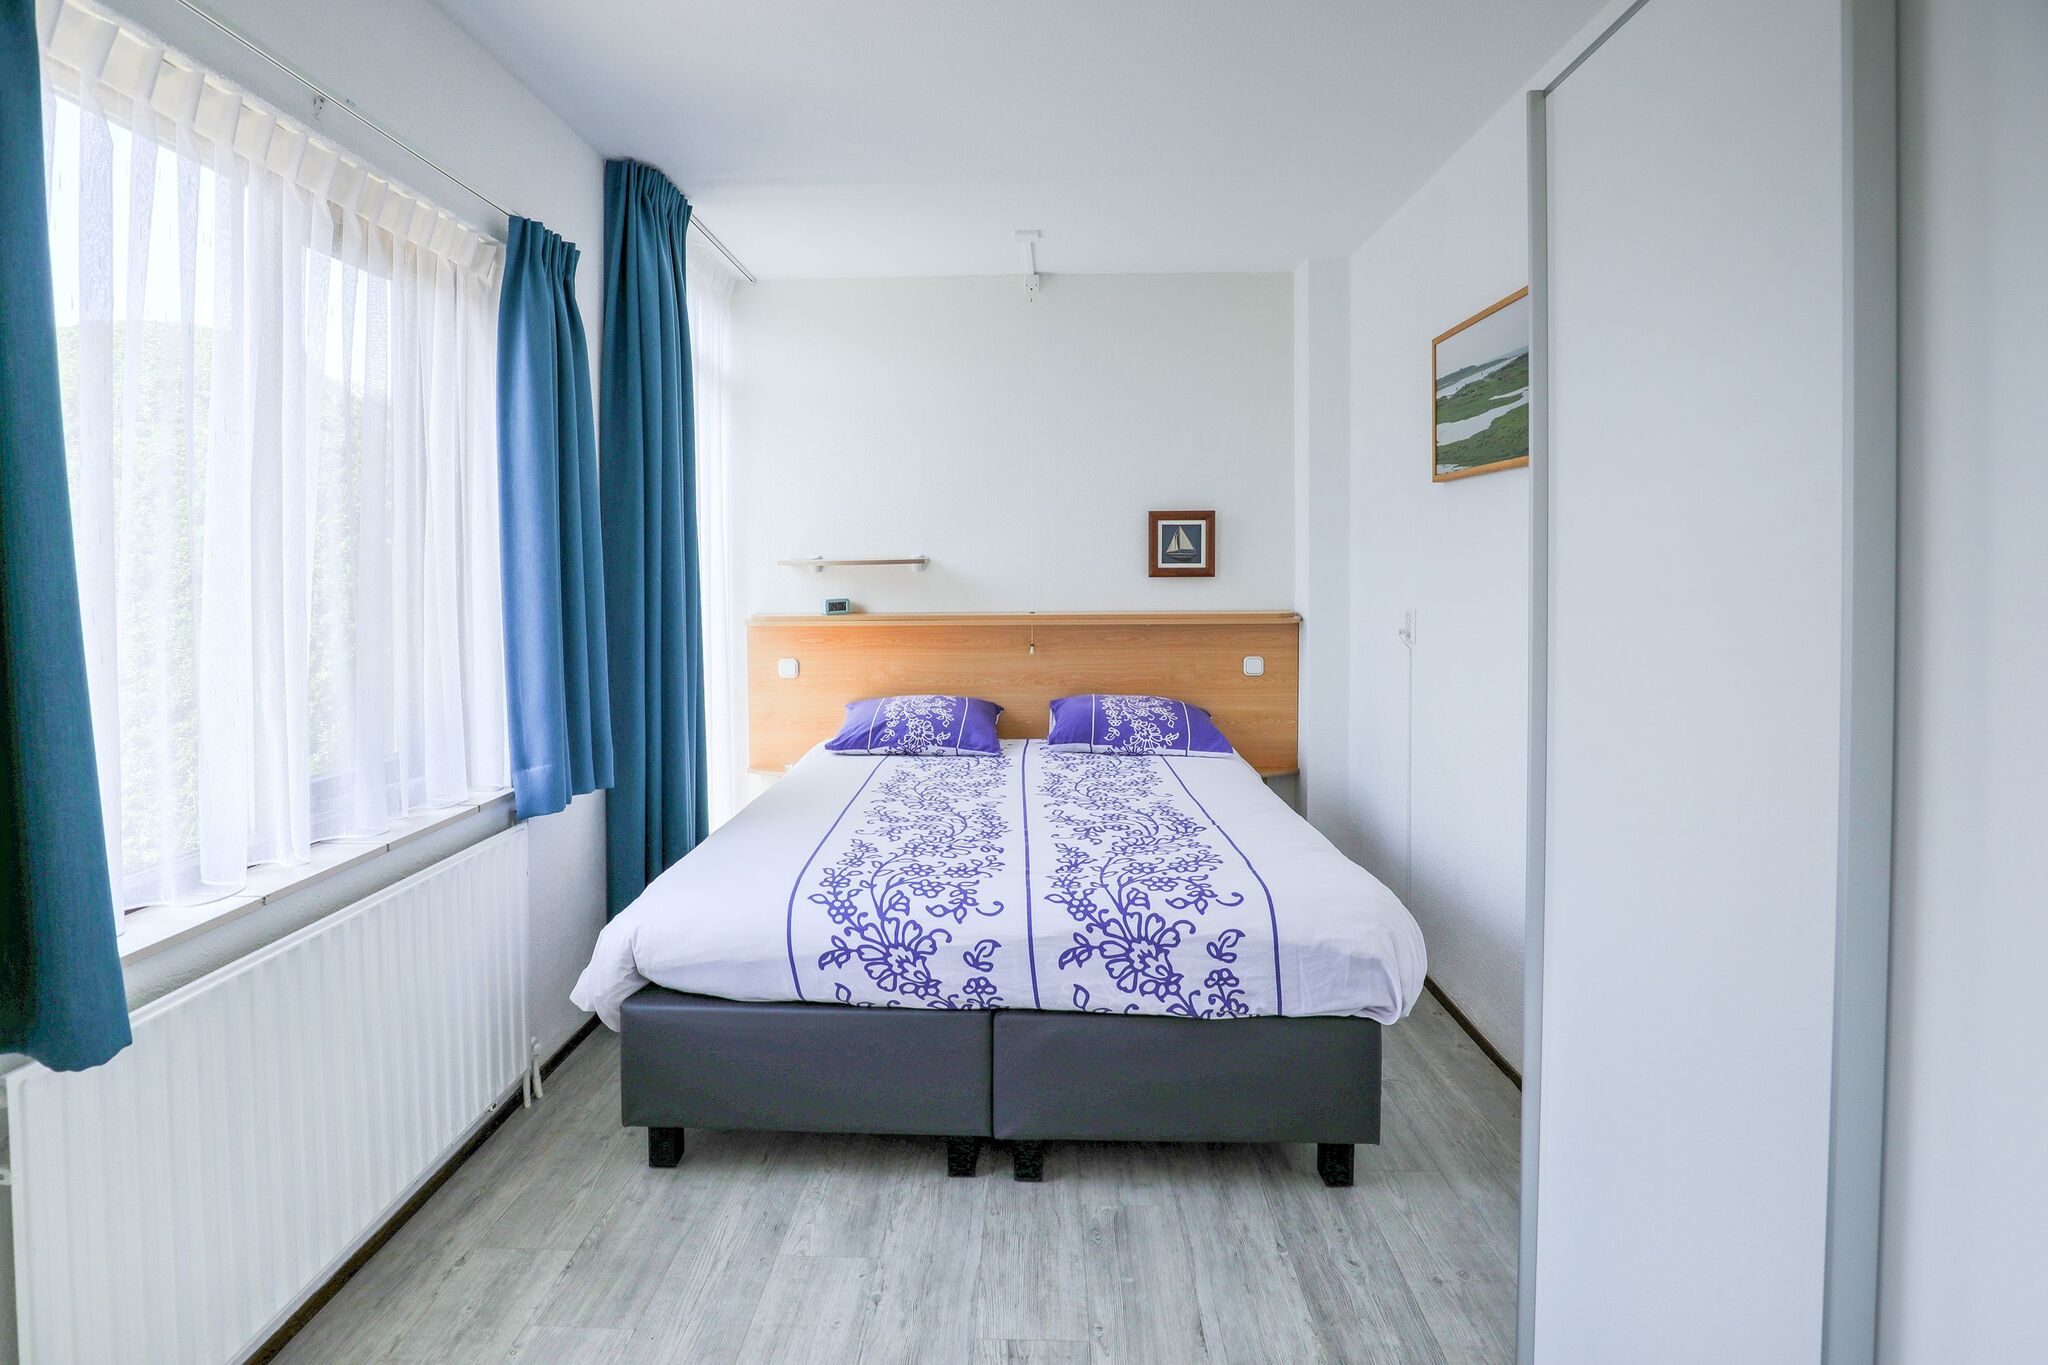 Well equipped holiday home in Nieuwvliet, just a few minutes walk from the beach